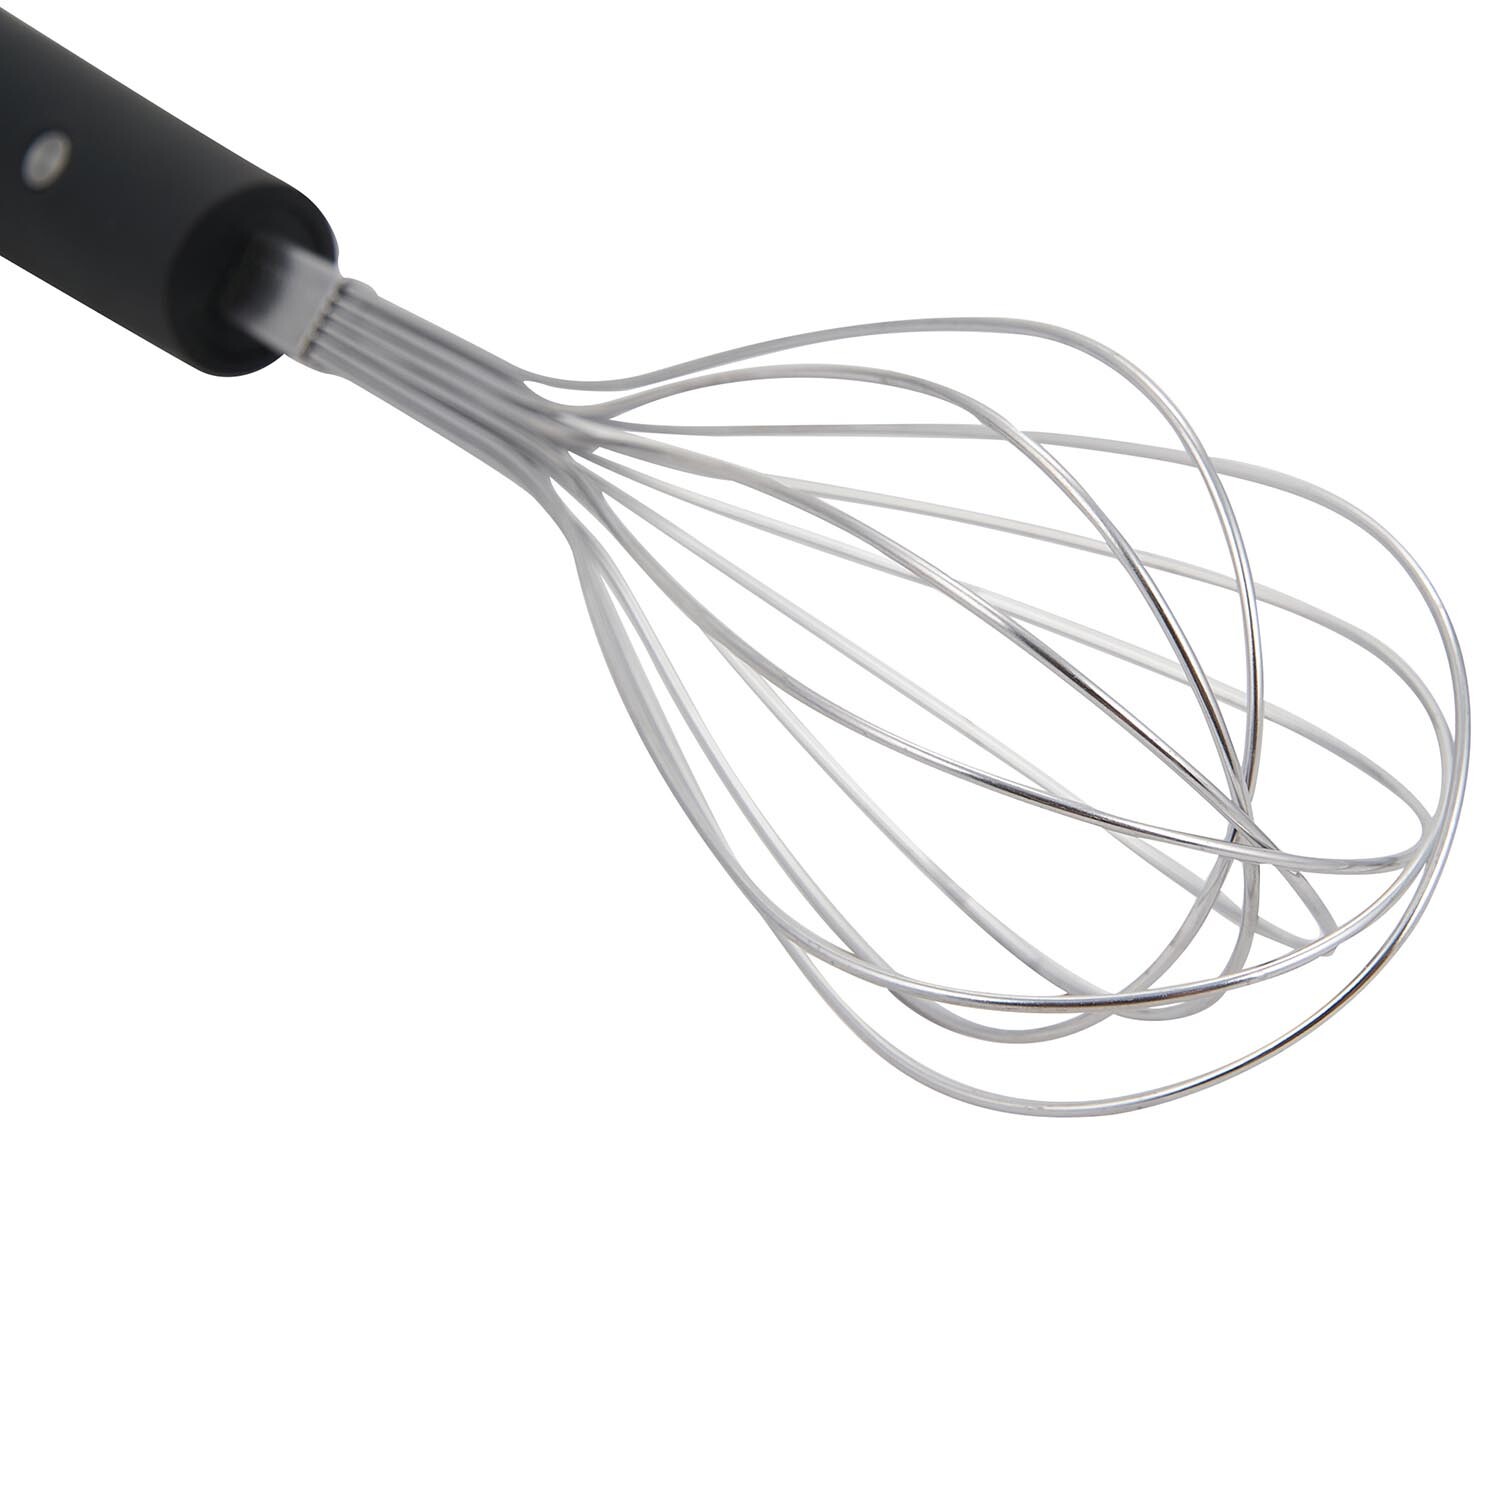 Kitchenmaster Whisk with Soft Touch Handle - Black Image 2